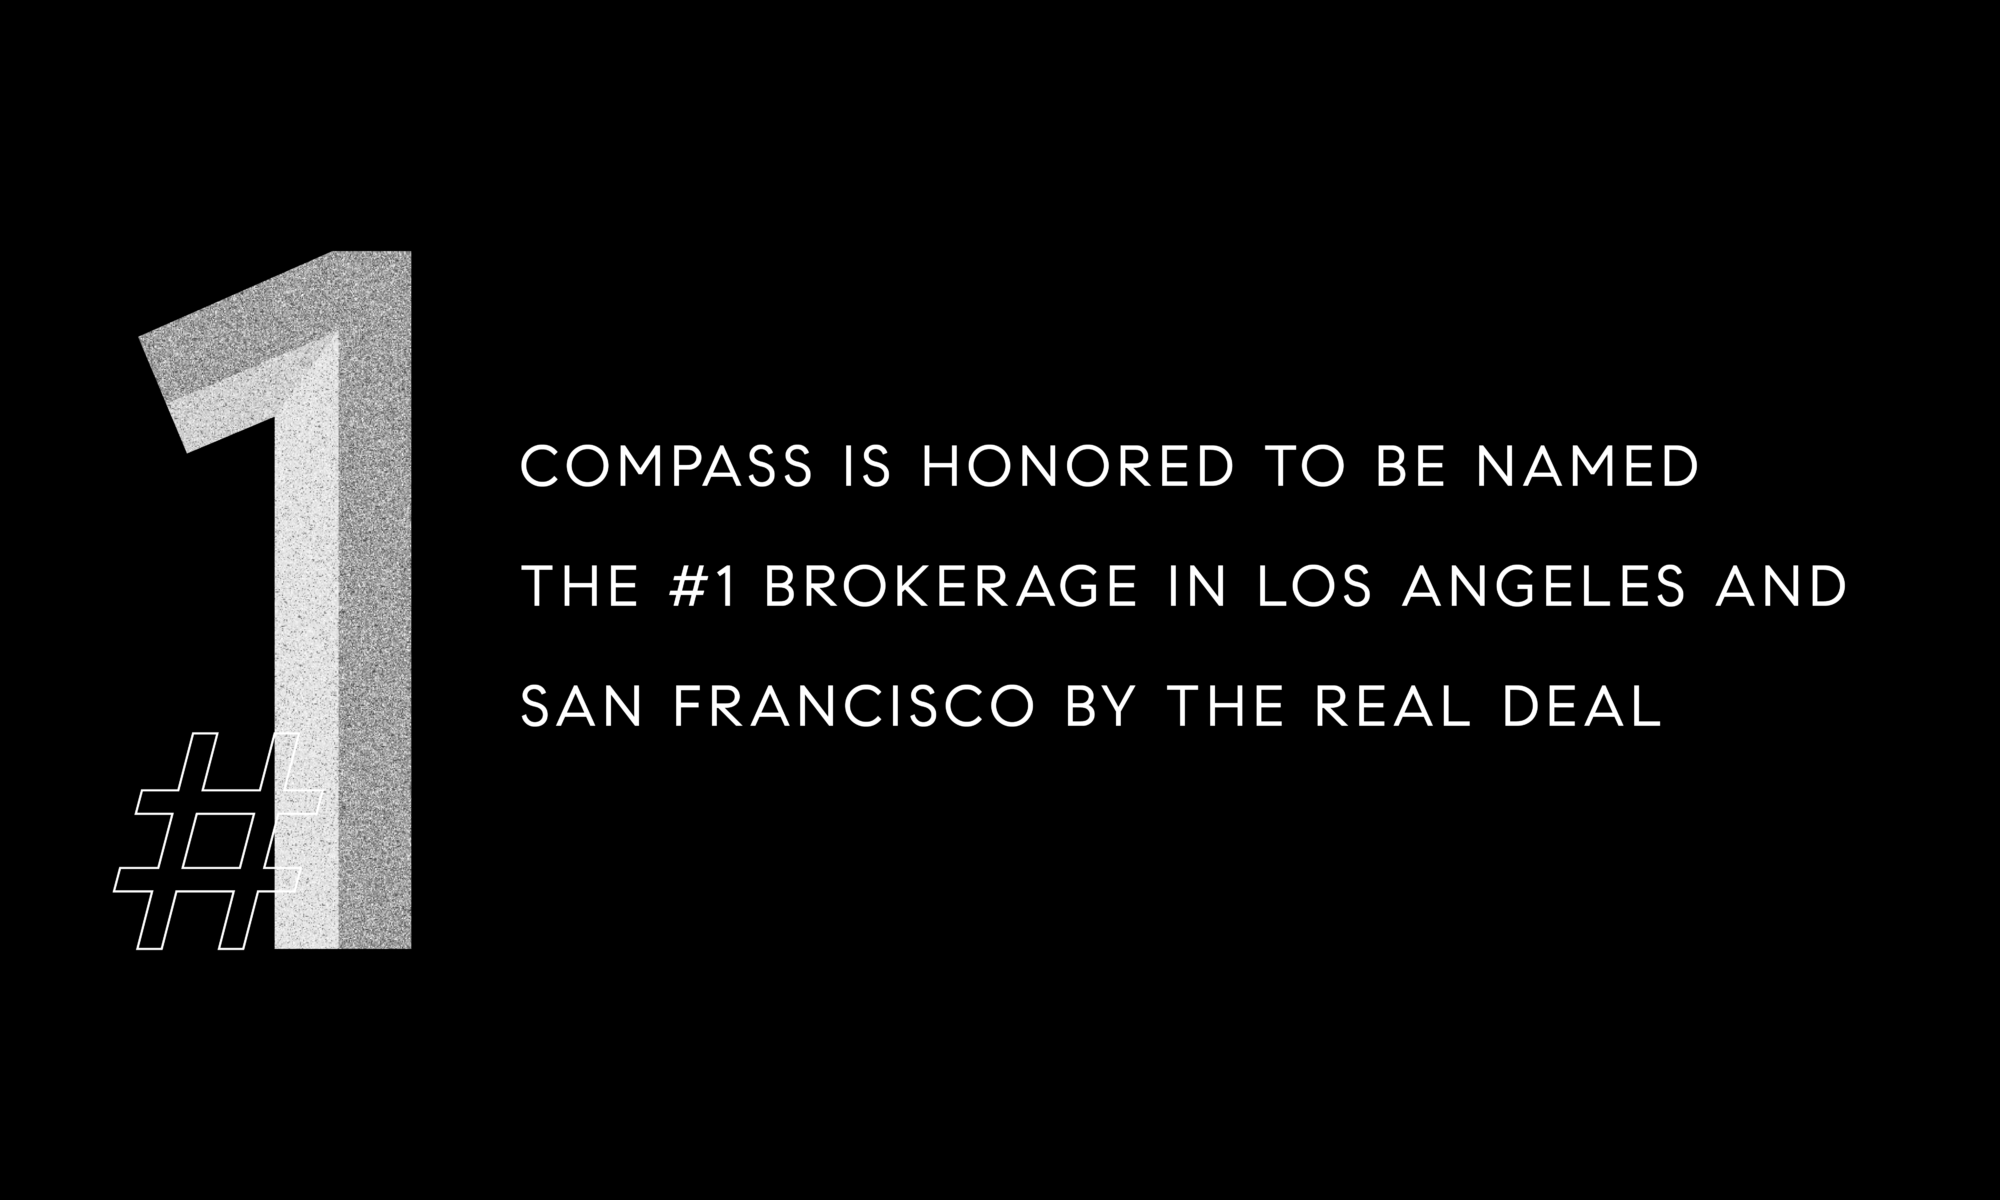 Compass Named #1 Brokerage in San Francisco and Los Angeles 